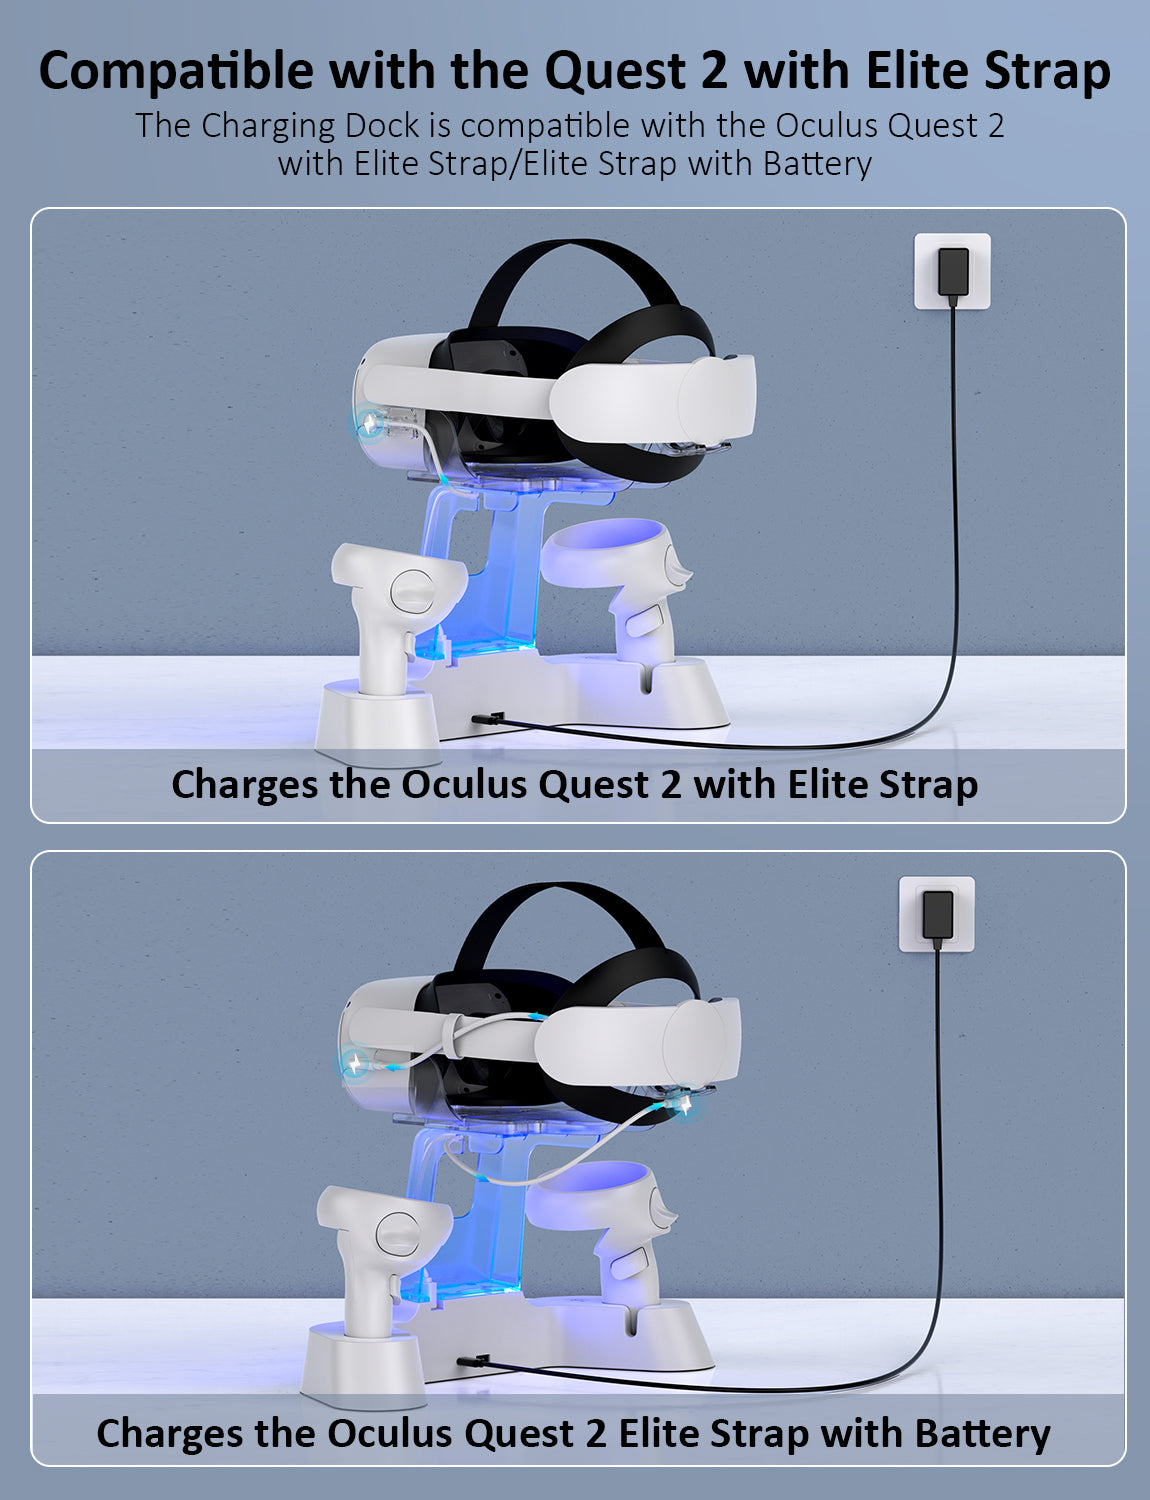 Enhanced Charging Dock is charging for the Oculus Quest 2 Elite Strap with Battery with power adapter